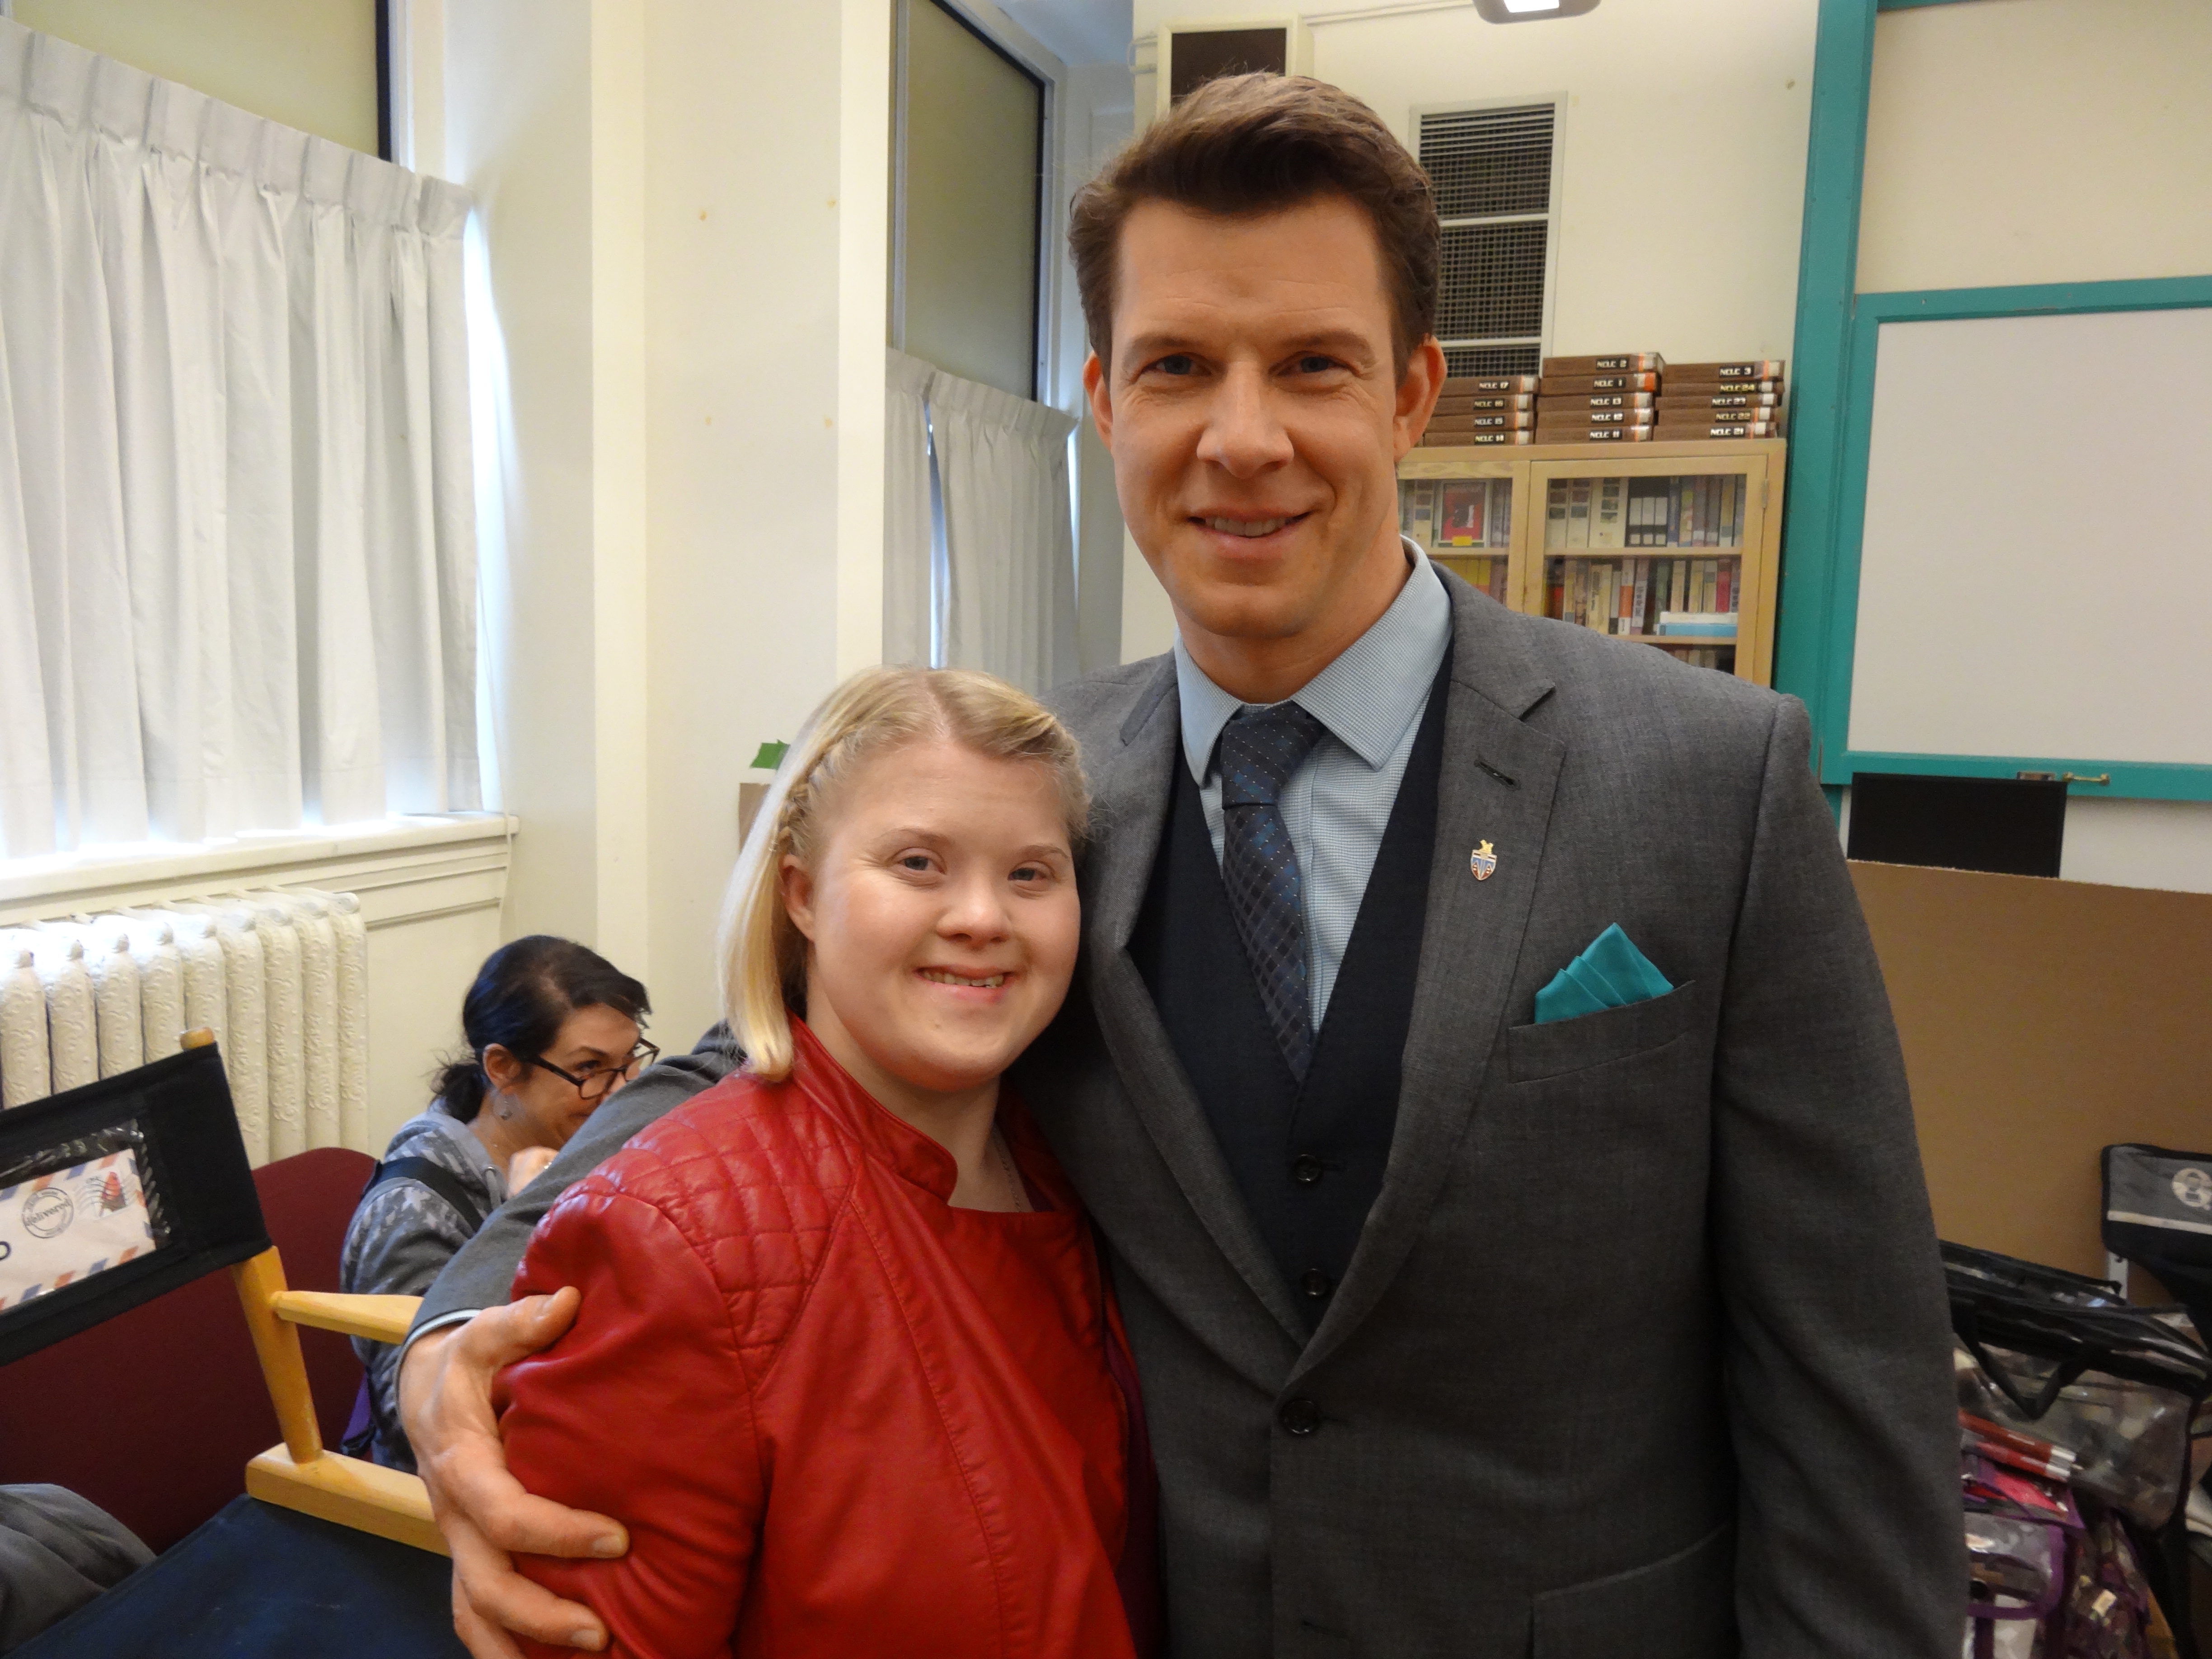 Jessica Kishner Morgan and Eric Mabius on the set of Signed, Sealed, Delivered.